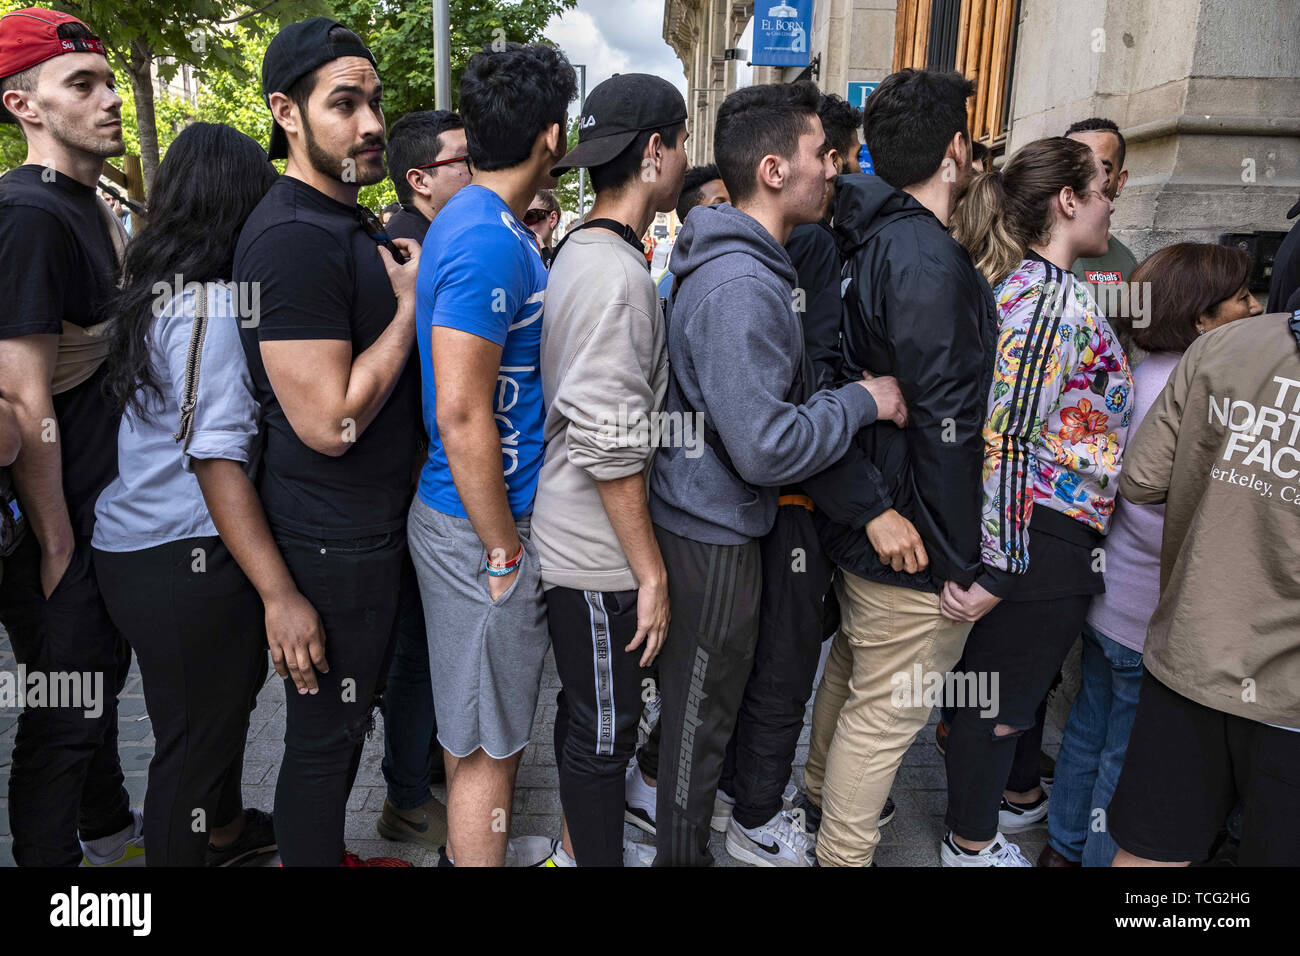 Barcelona, Catalonia, Spain. 7th June, 2019. A group of young people stand  in a queue to access the purchase of the new Adidas Yeezy Boost shoe.The  German manufacturer of sports shoes Adidas